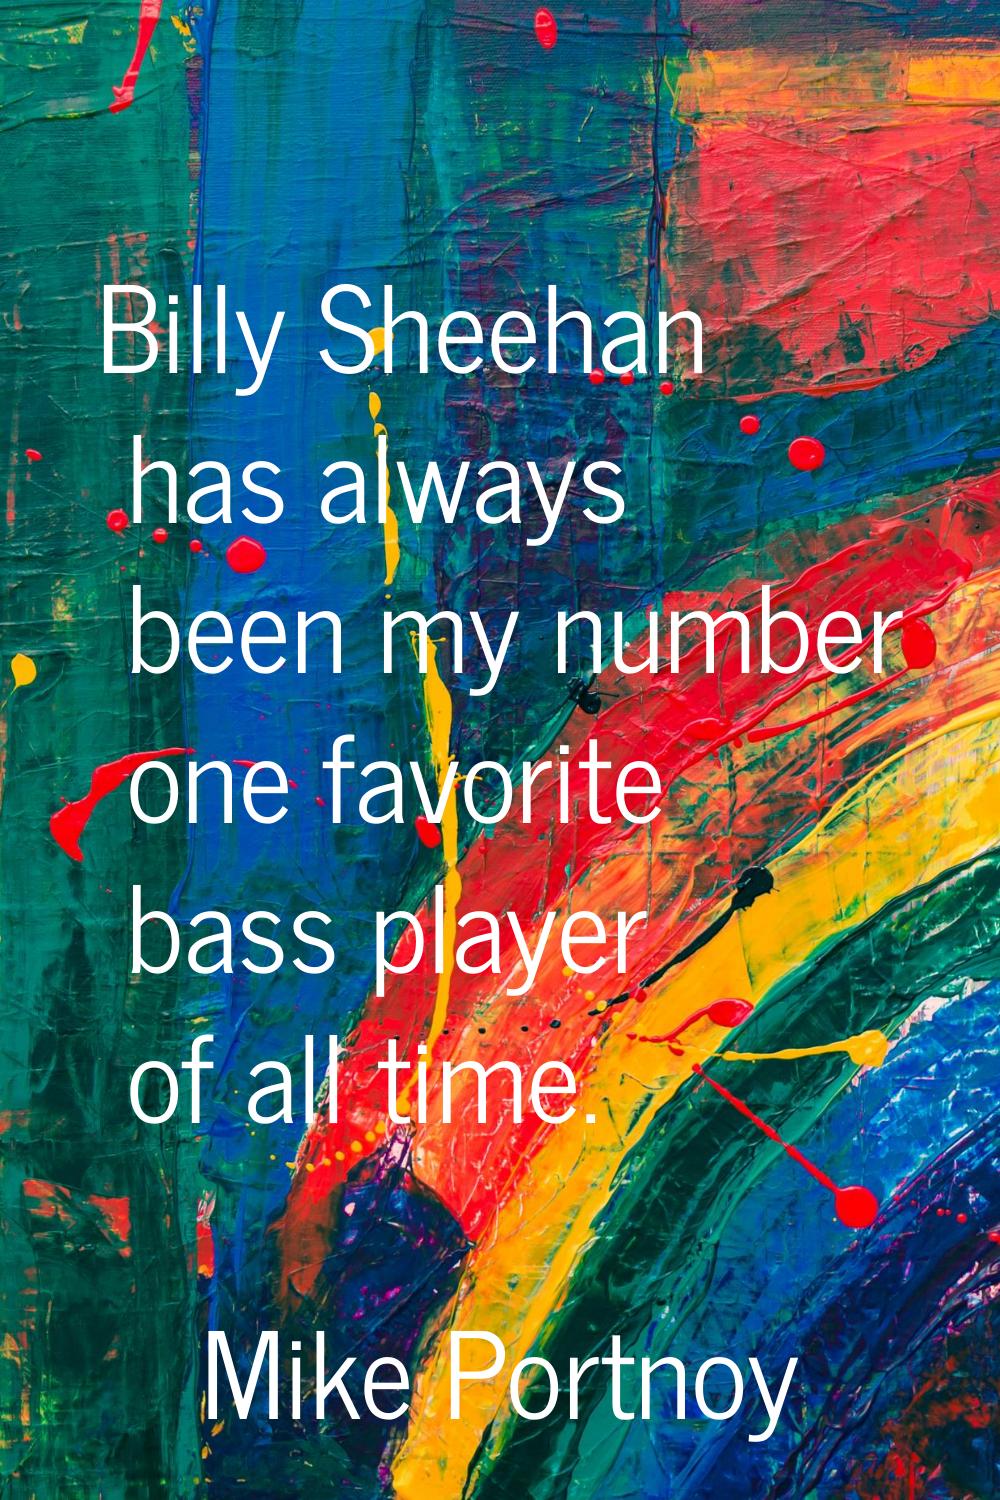 Billy Sheehan has always been my number one favorite bass player of all time.